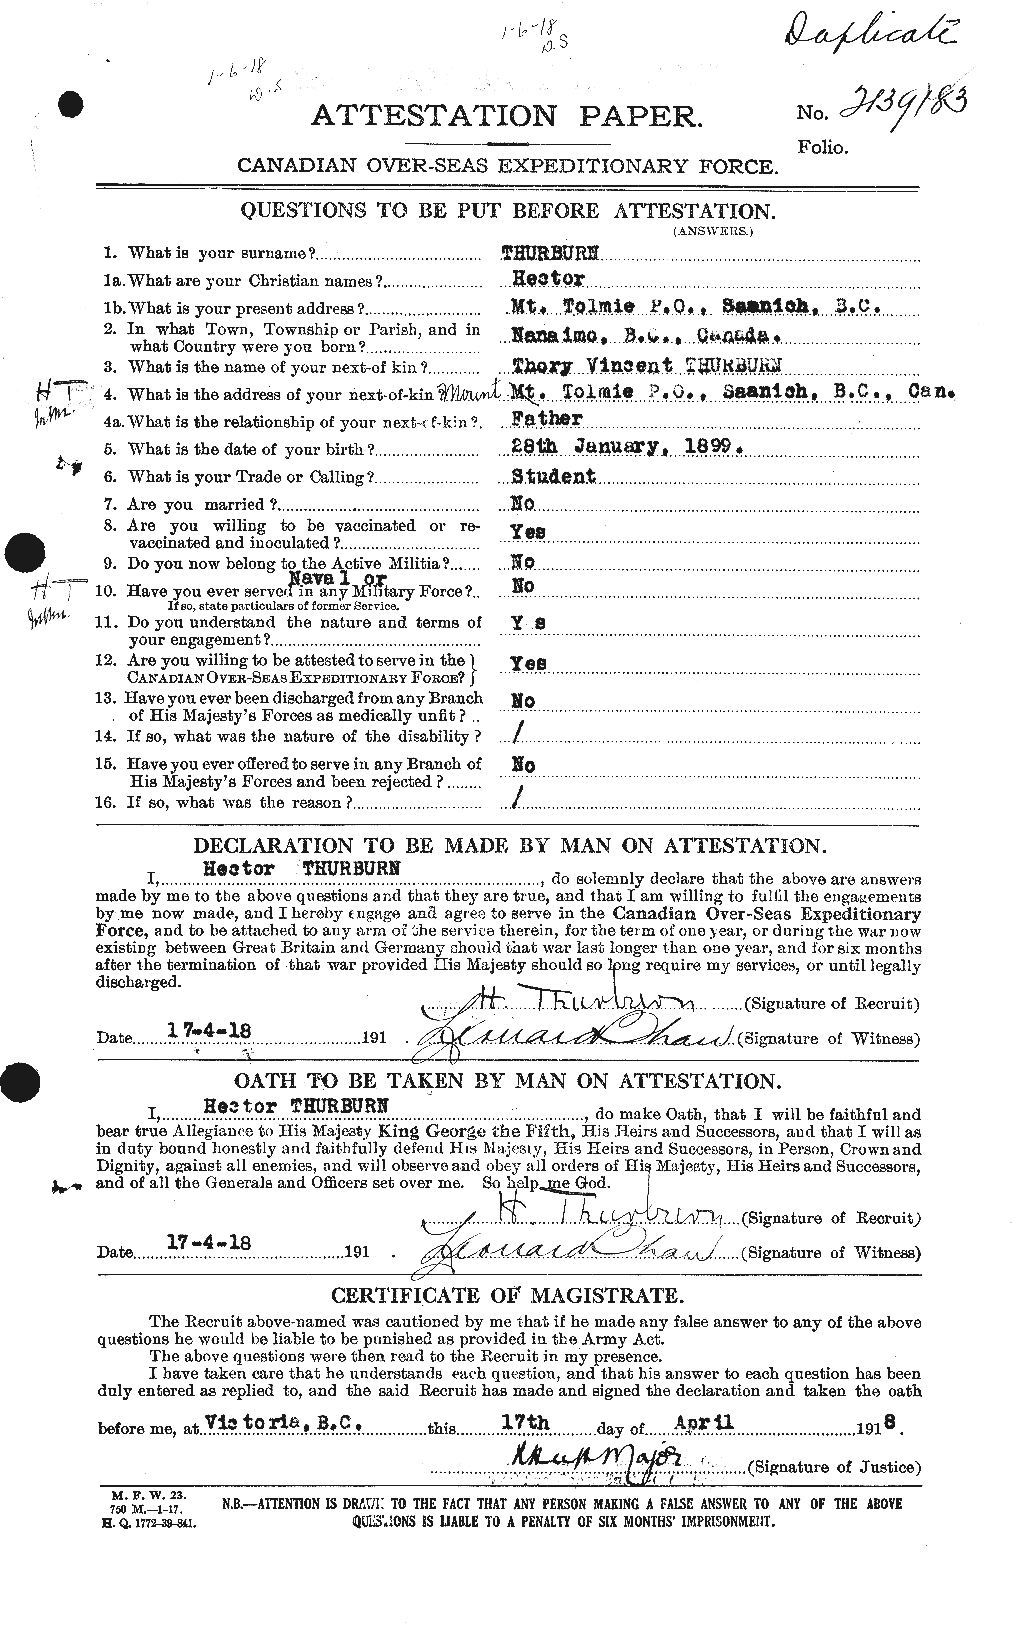 Personnel Records of the First World War - CEF 635214a